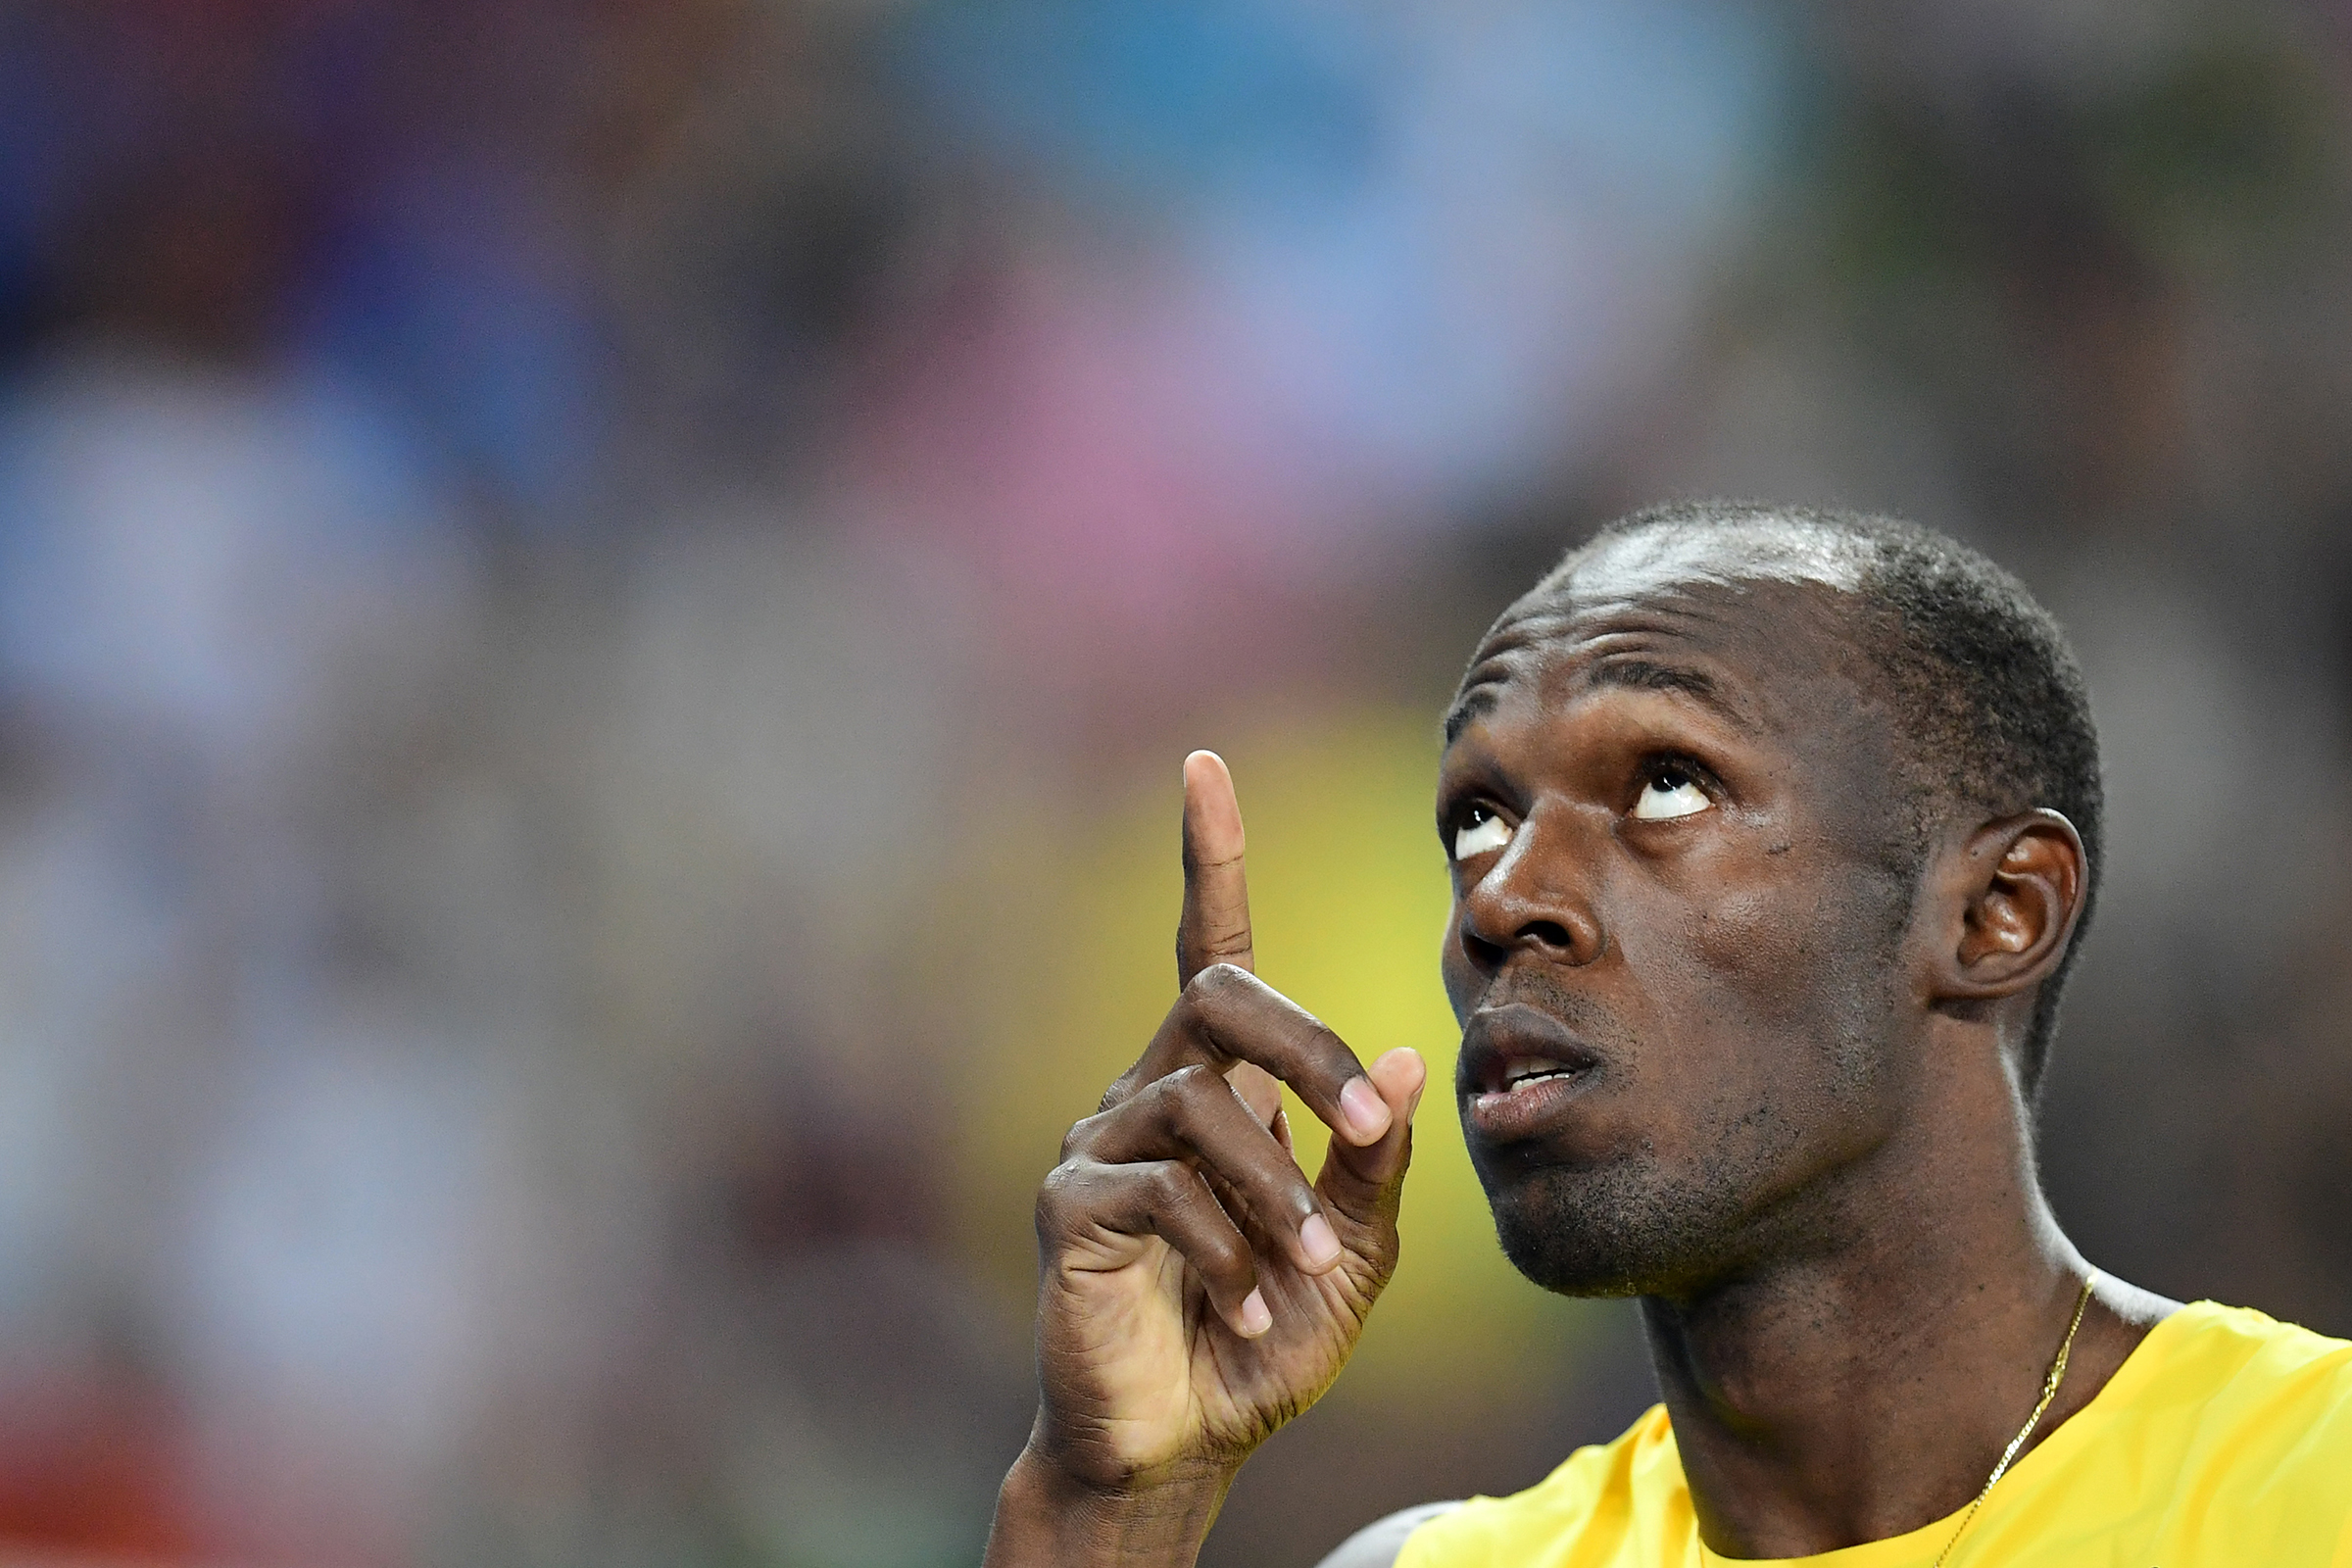 Jamaica's Usain Bolt gestures in the Men's 200m Semifinal during the athletics event at the Rio 2016 Olympic Games at the Olympic Stadium in Rio de Janeiro on August 17, 2016.   / AFP PHOTO / FRANCK FIFE